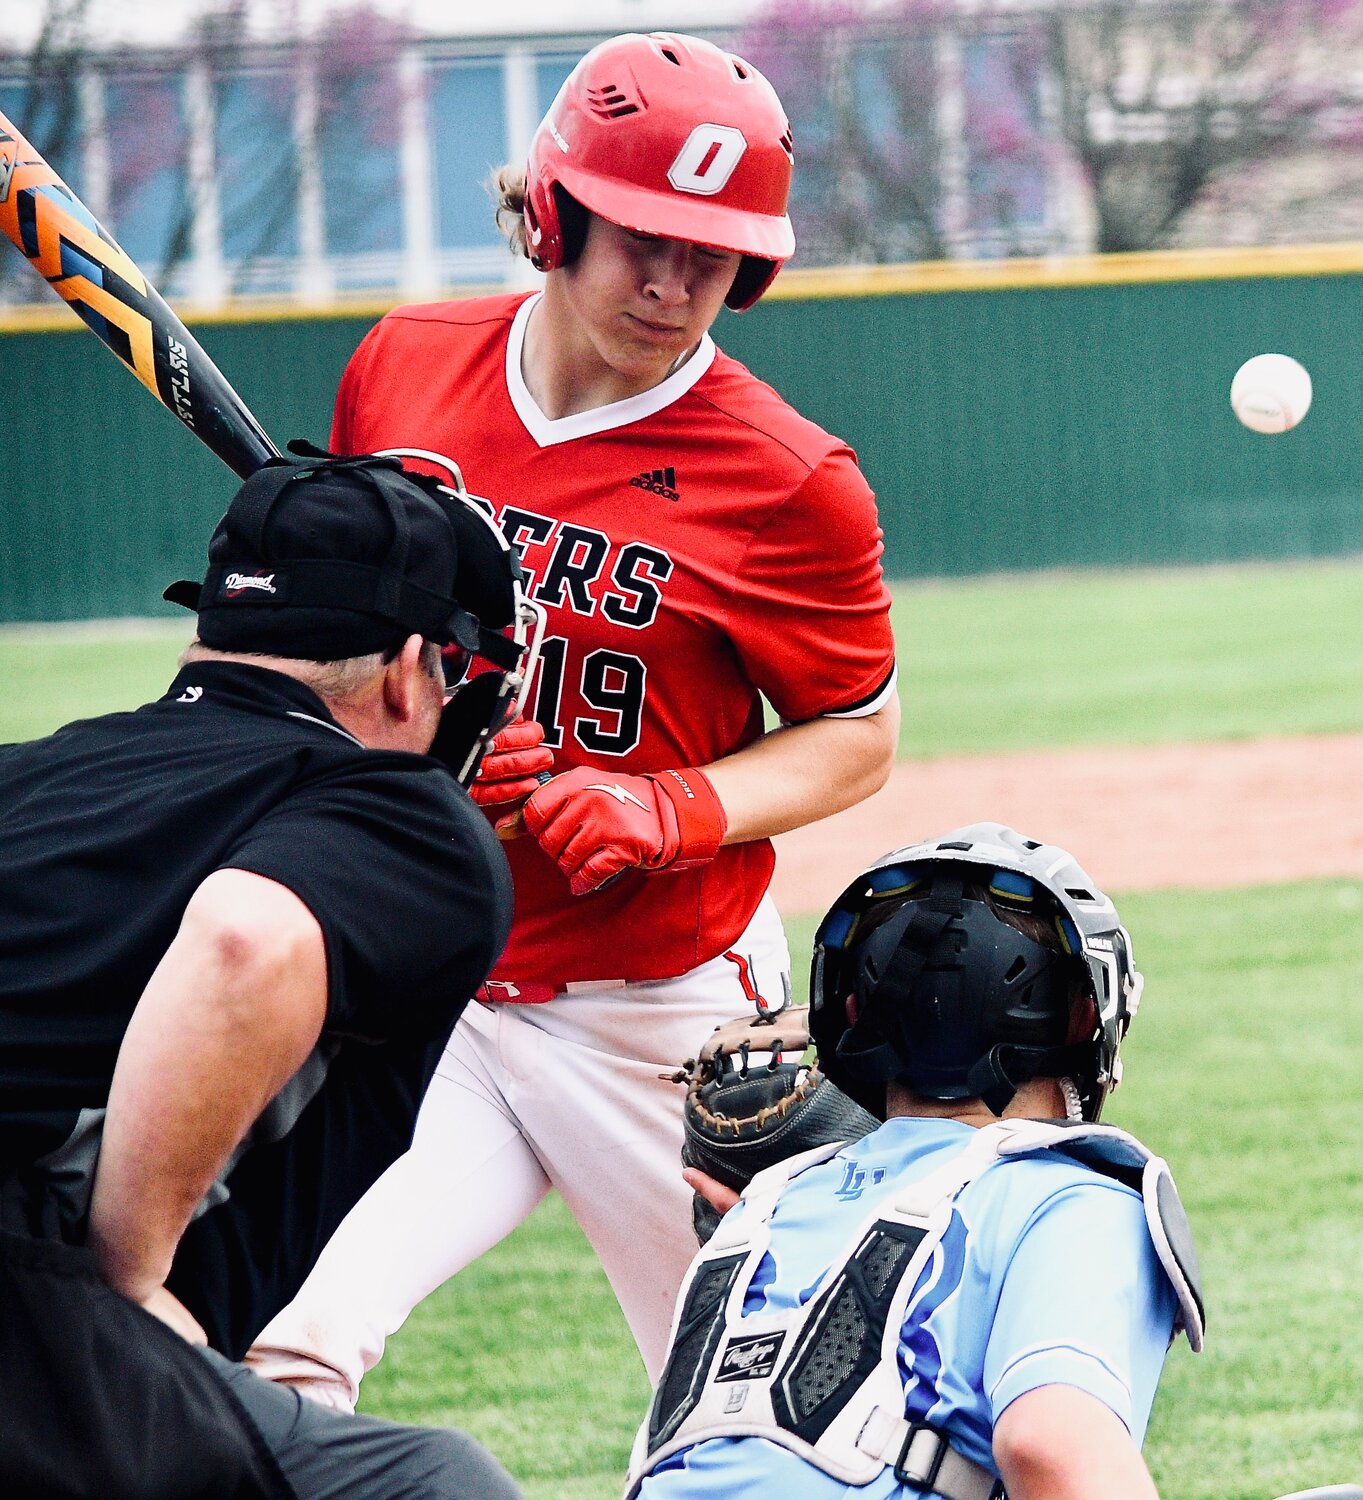 OZARK'S GEORGE REYNOLDS braces himself prior to being hit by a pitch.